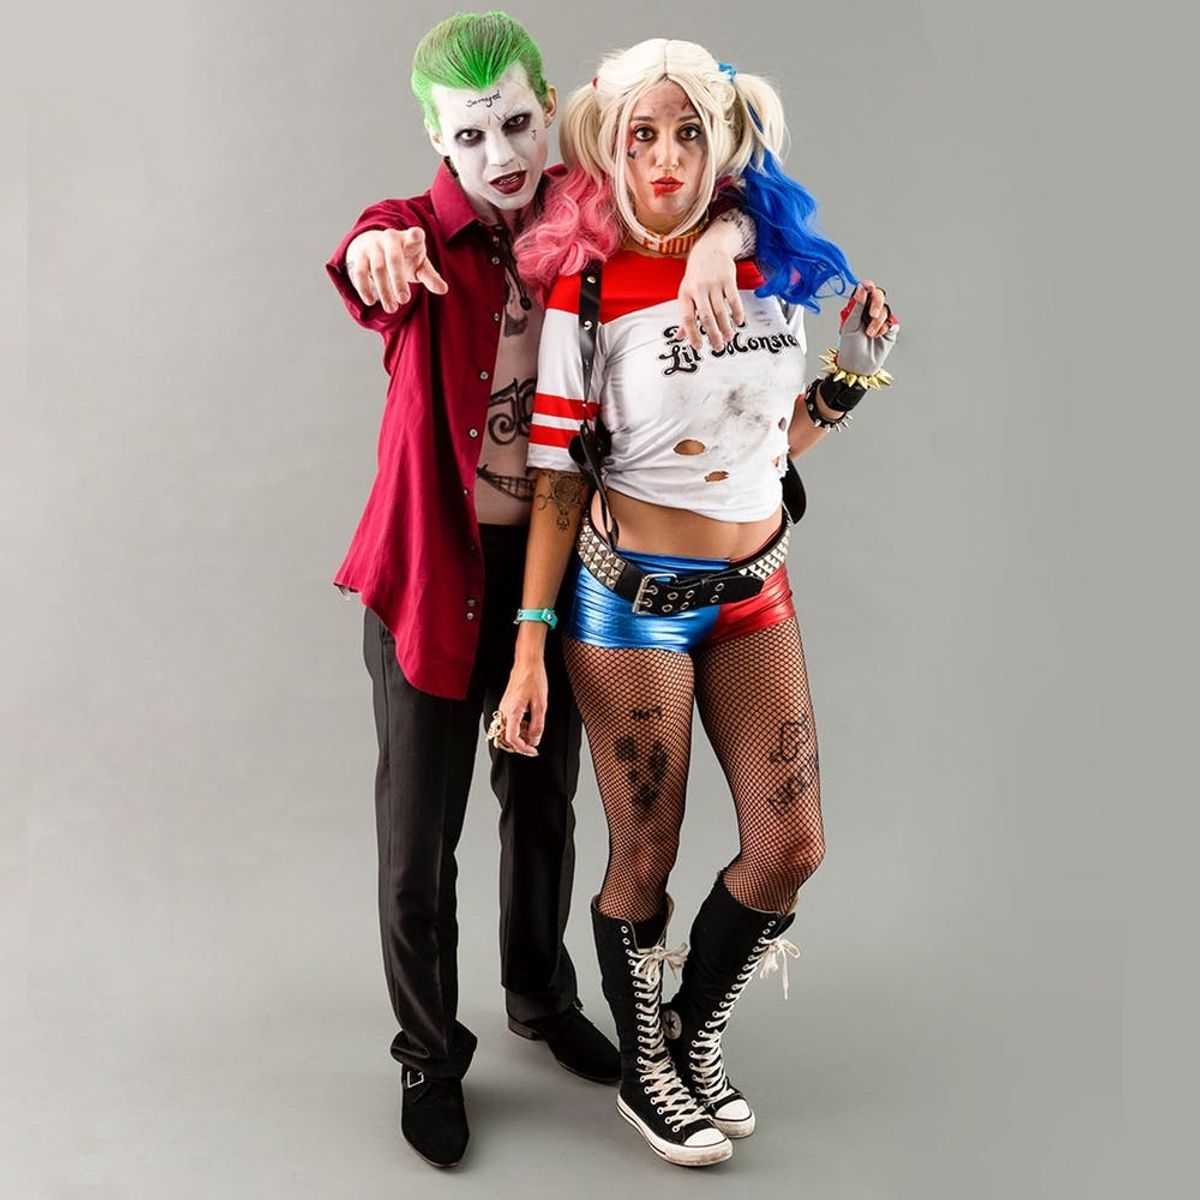 How to Rock Suicide Squad’s Joker + Harley Quinn As a Couples Costume